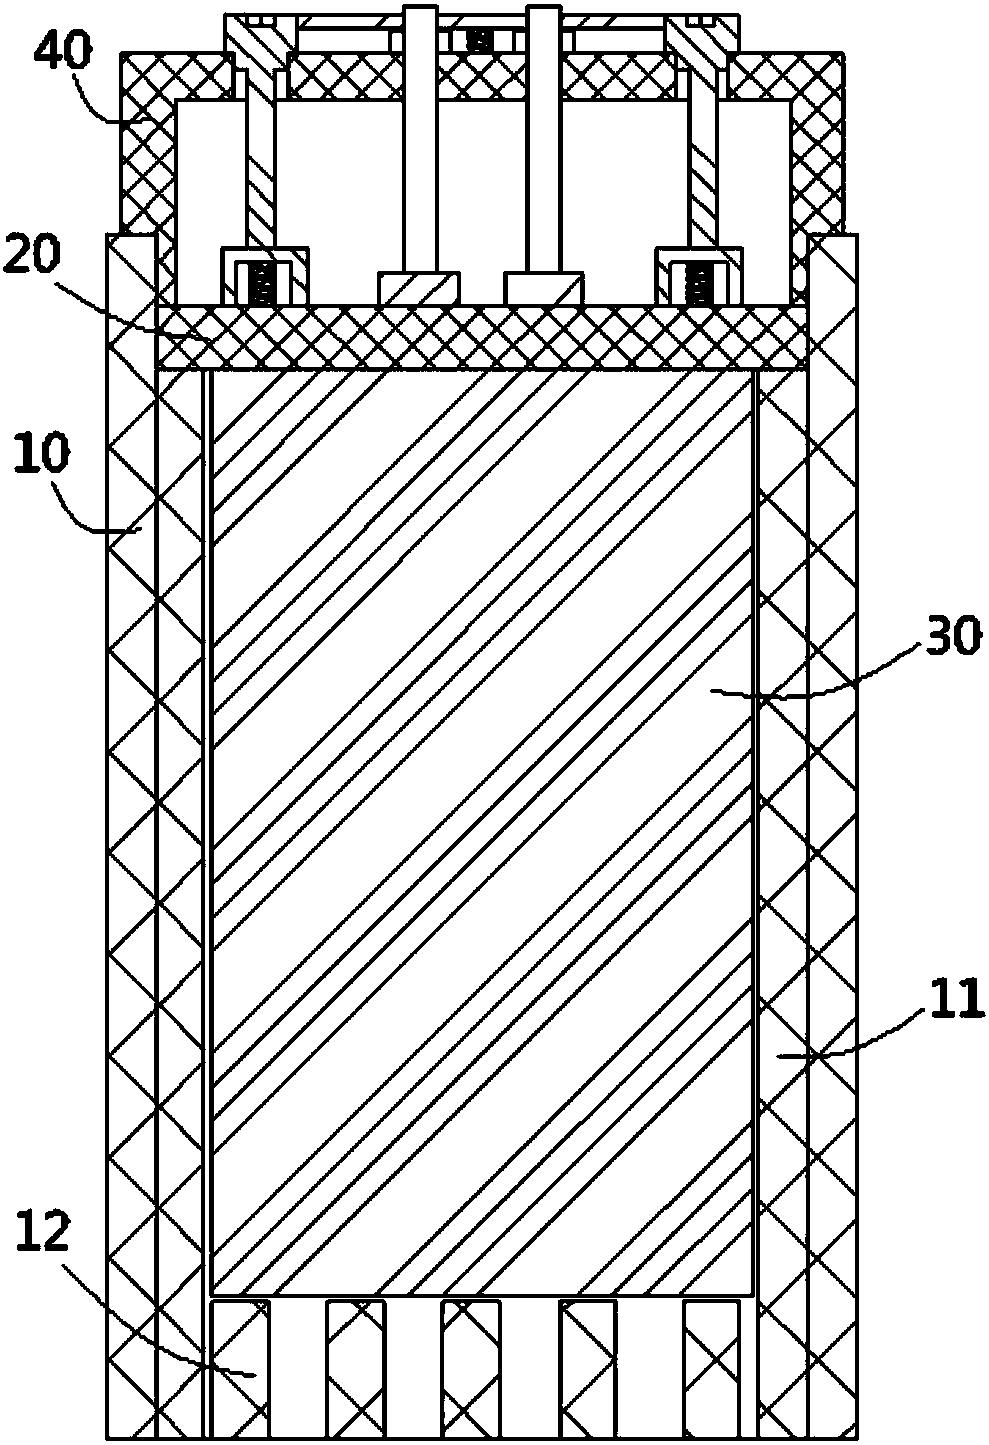 Battery thermal protection mechanism for communication equipment